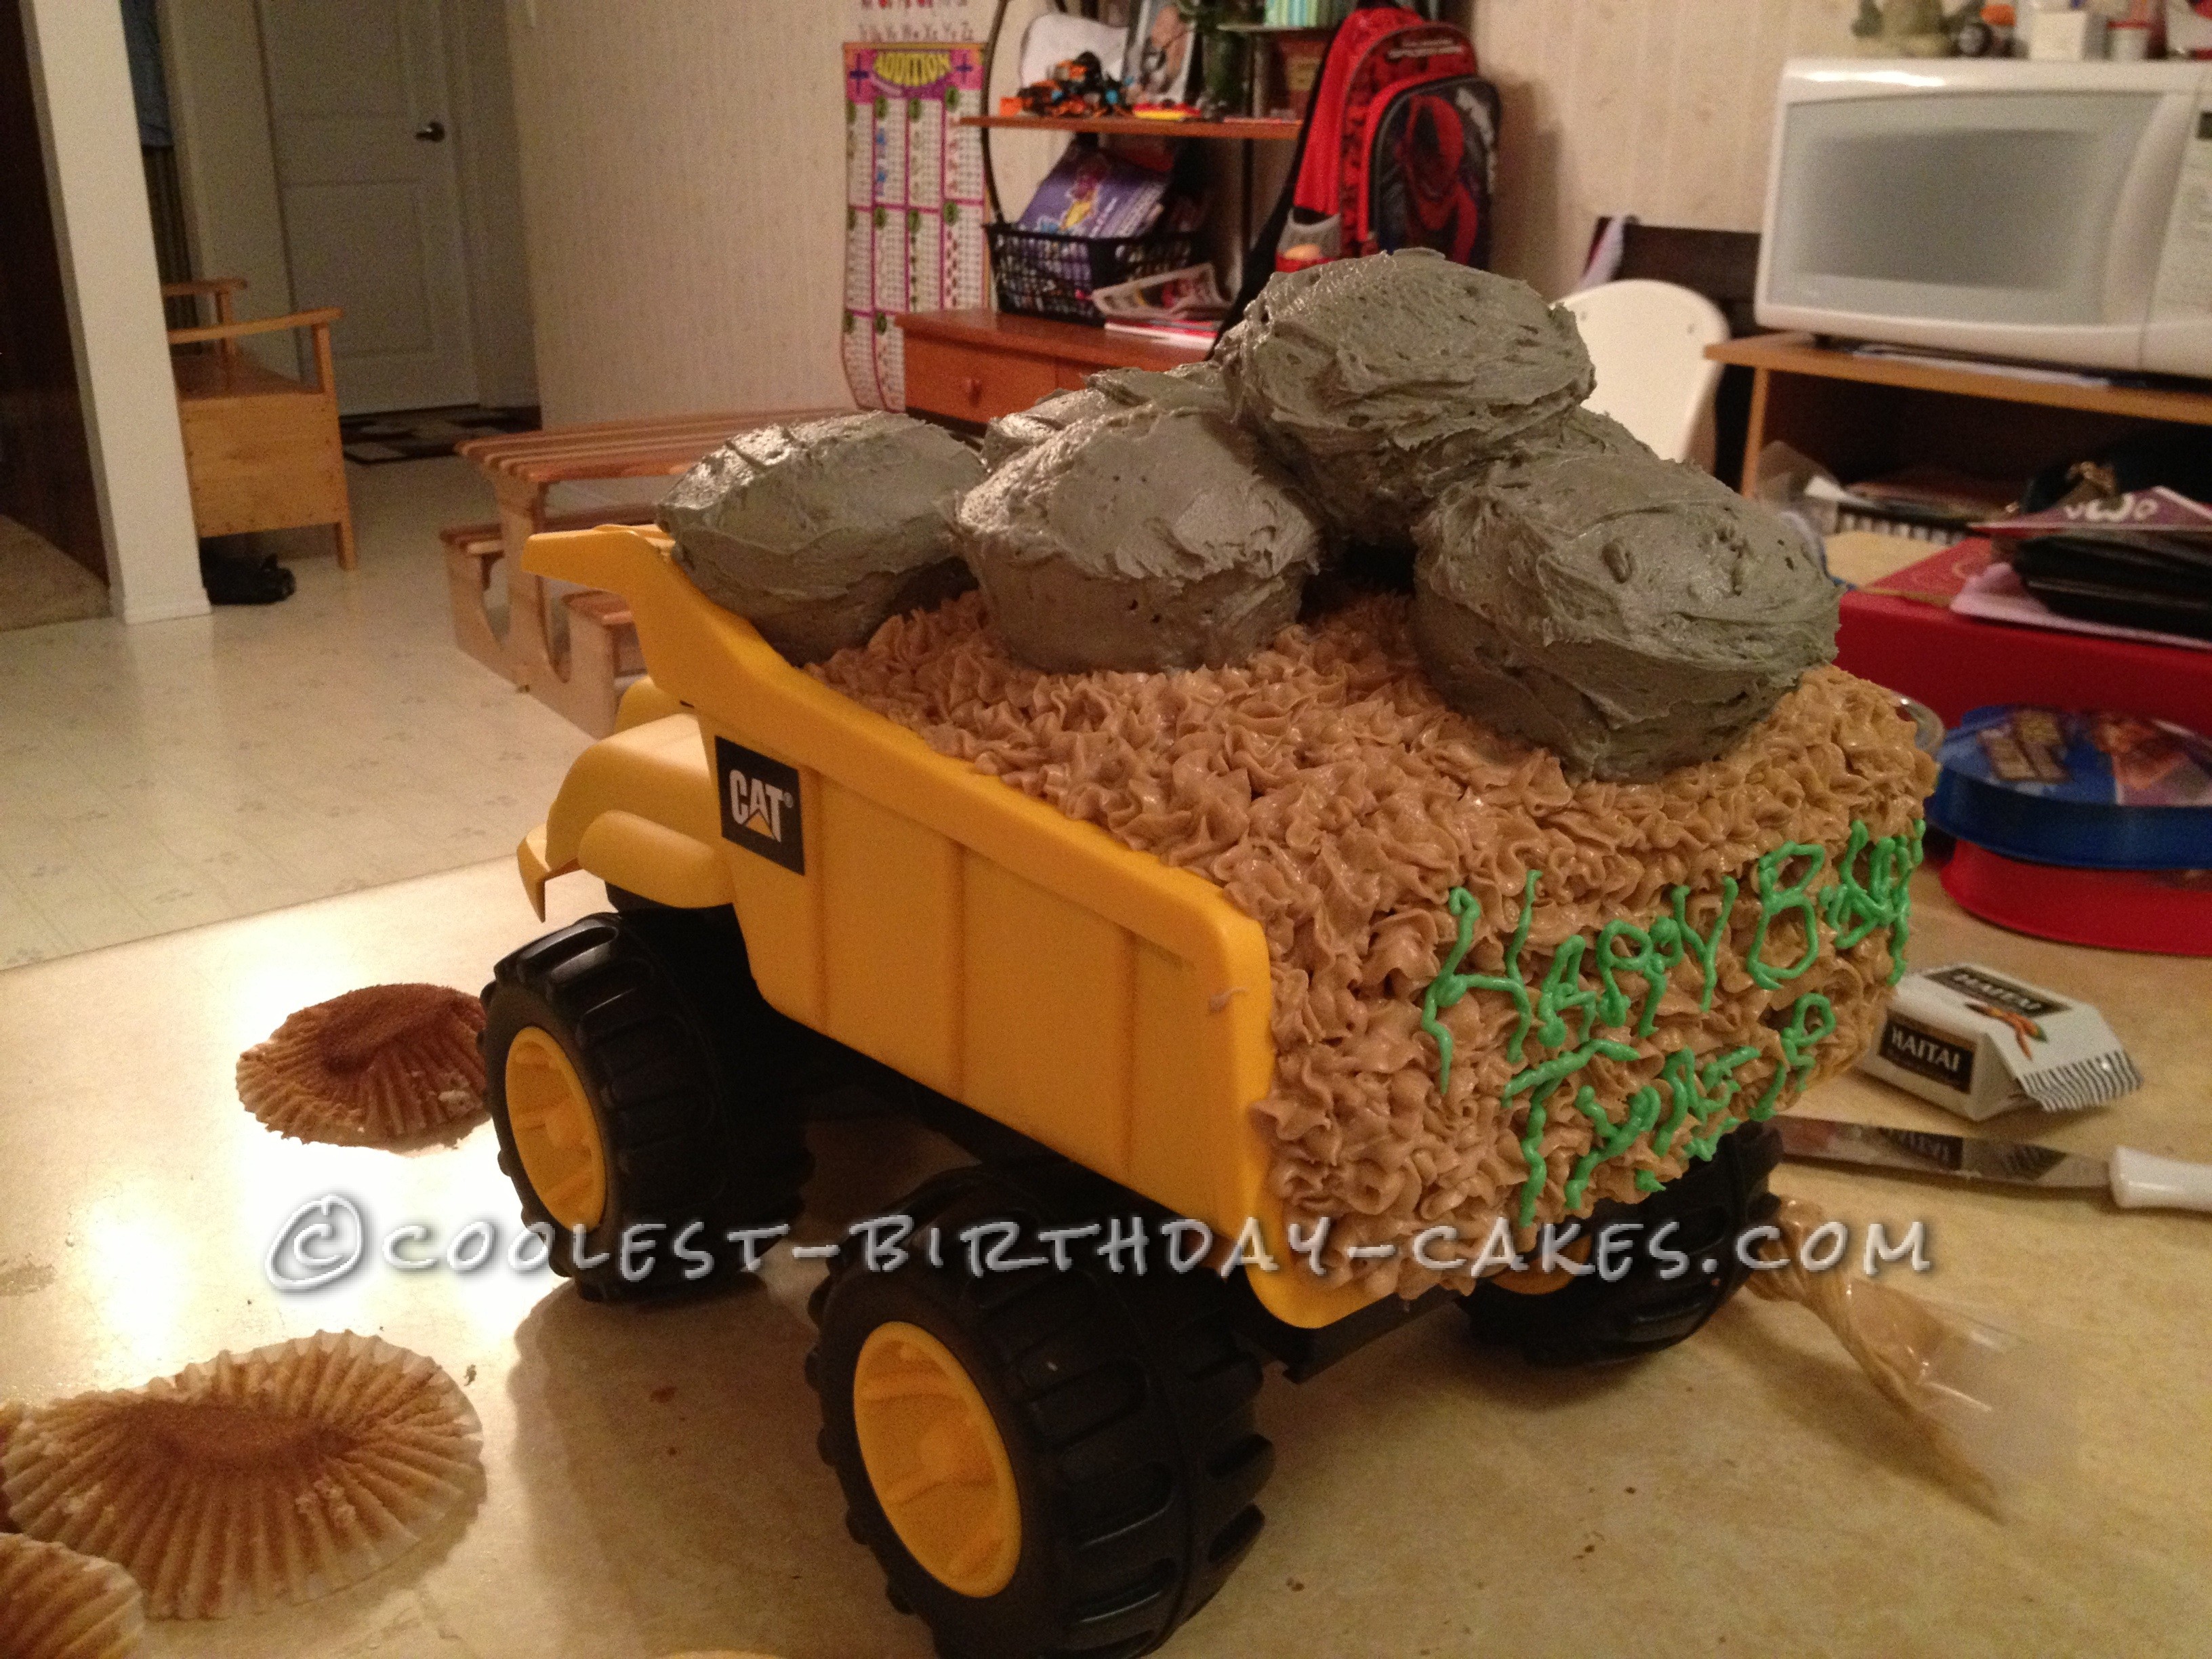 Cool Digger Dirt Cake - You Can Dig Your Own Cake!